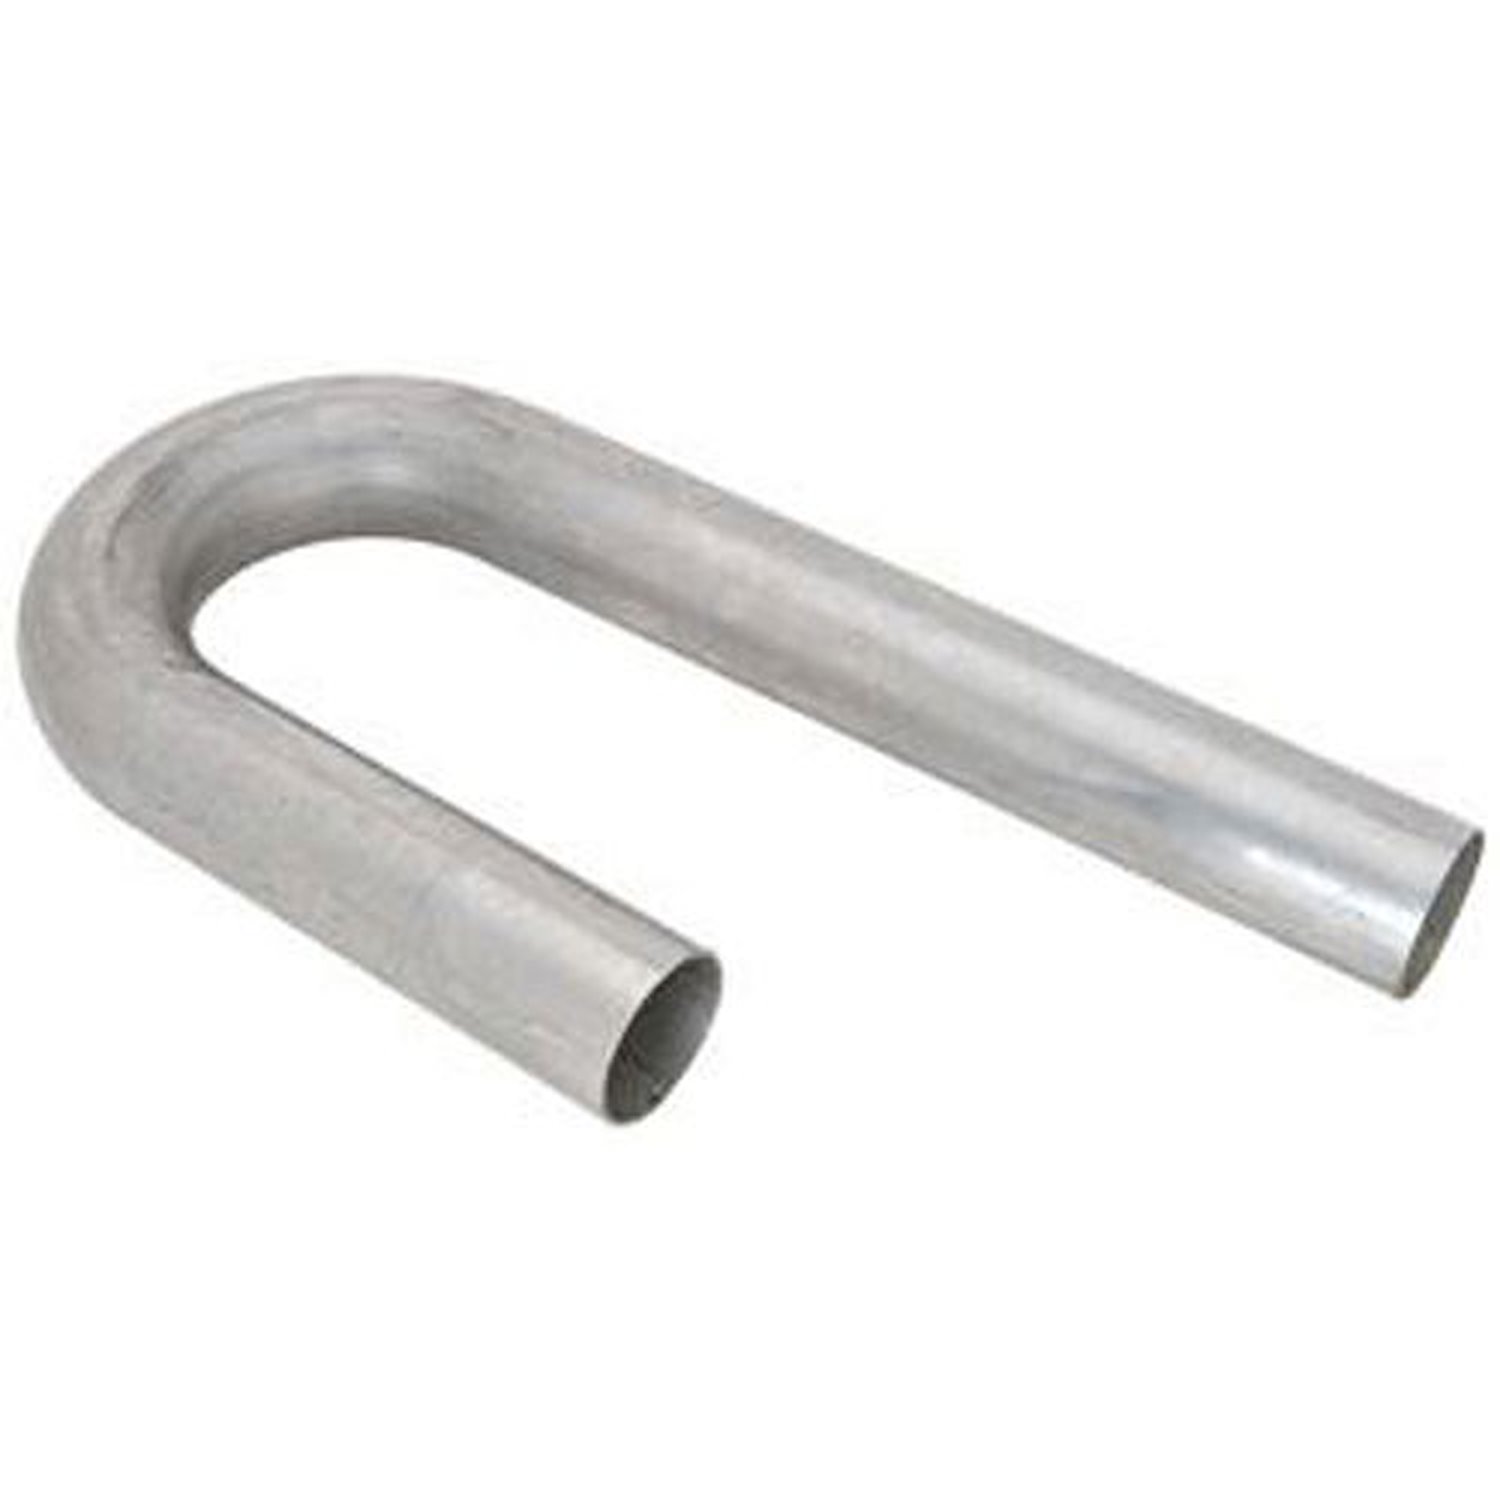 Stainless Steel 1-7/8" J-Bend